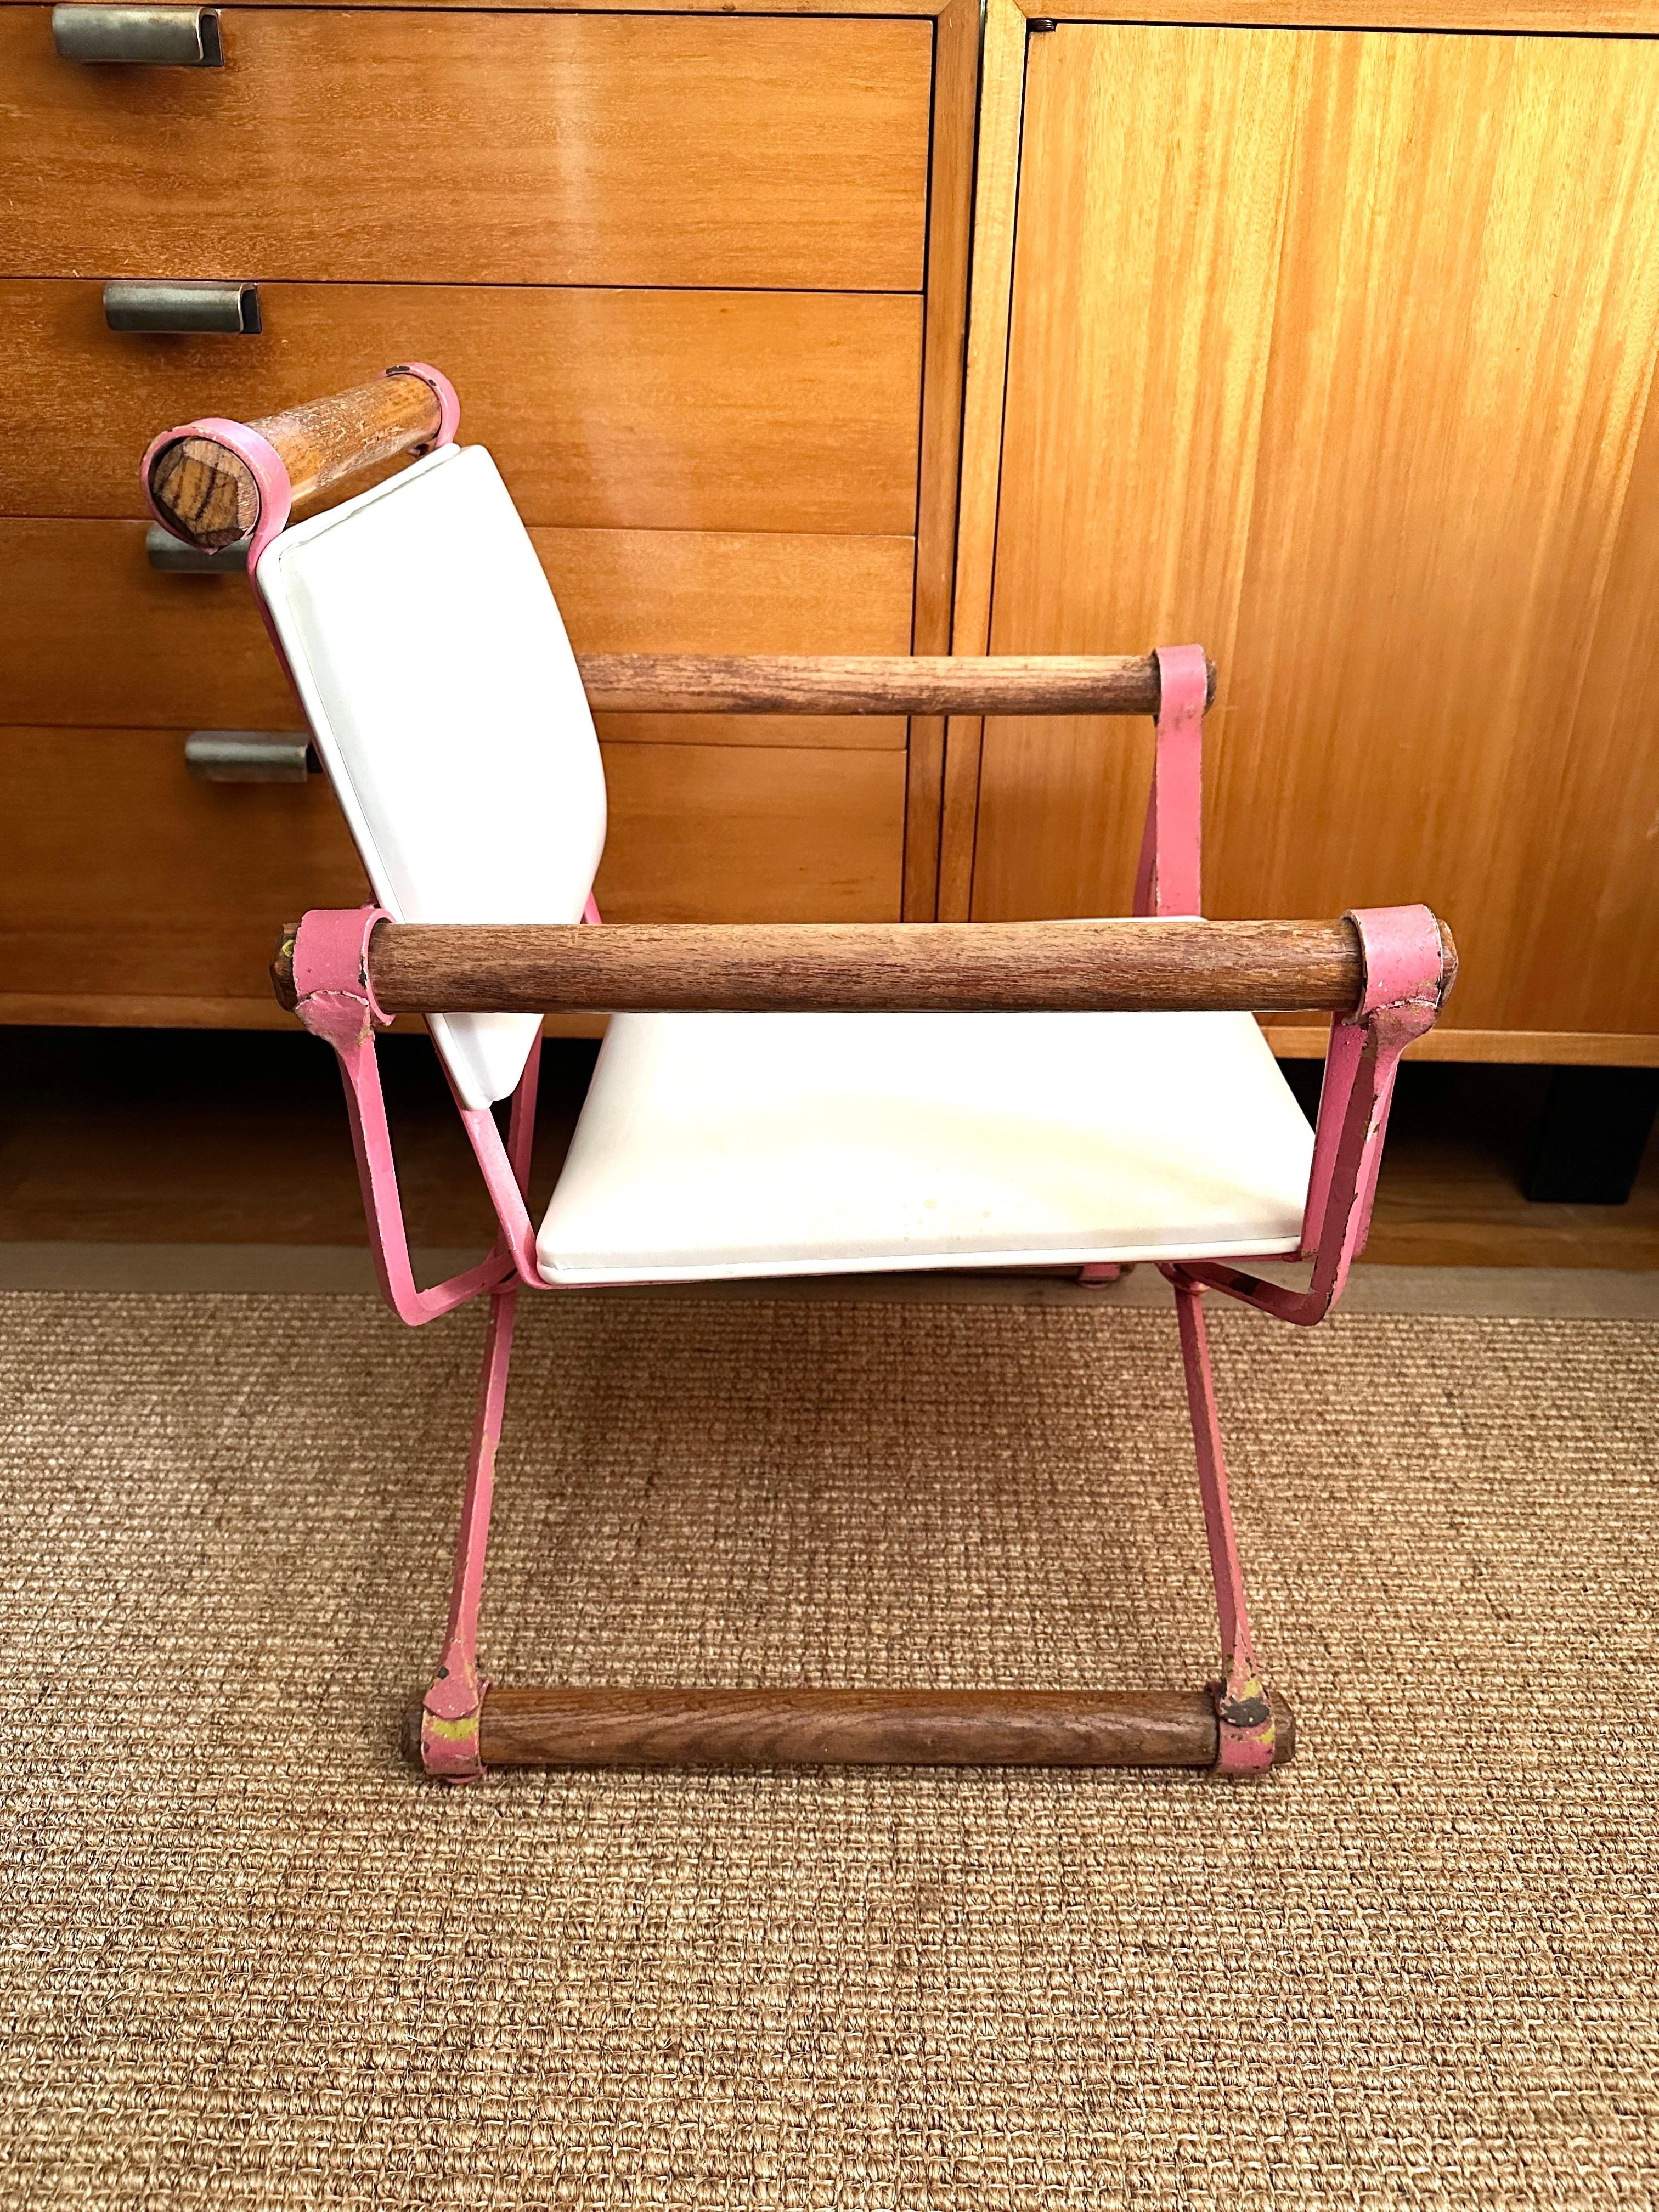 Mid-20th Century Diminutive Childs Chair Designed by Cleo Baldon for Terra For Sale